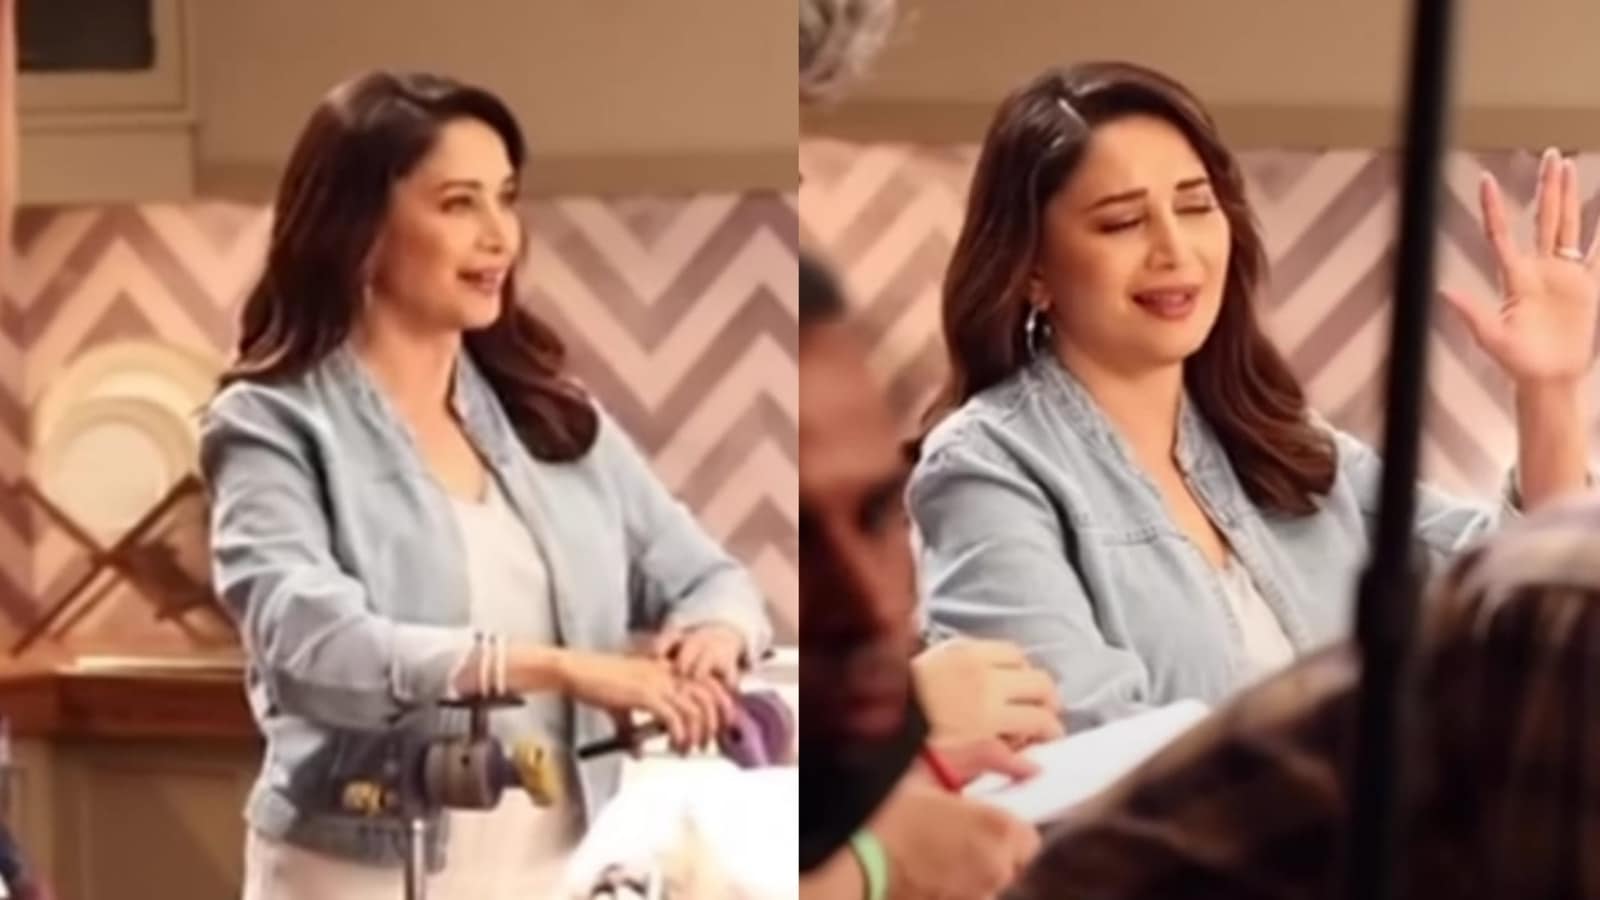 Madhuri Dixitxxxvideo - Madhuri Dixit shares BTS moments from ad shoot, calls herself 'boss lady.'  Watch | Bollywood - Hindustan Times